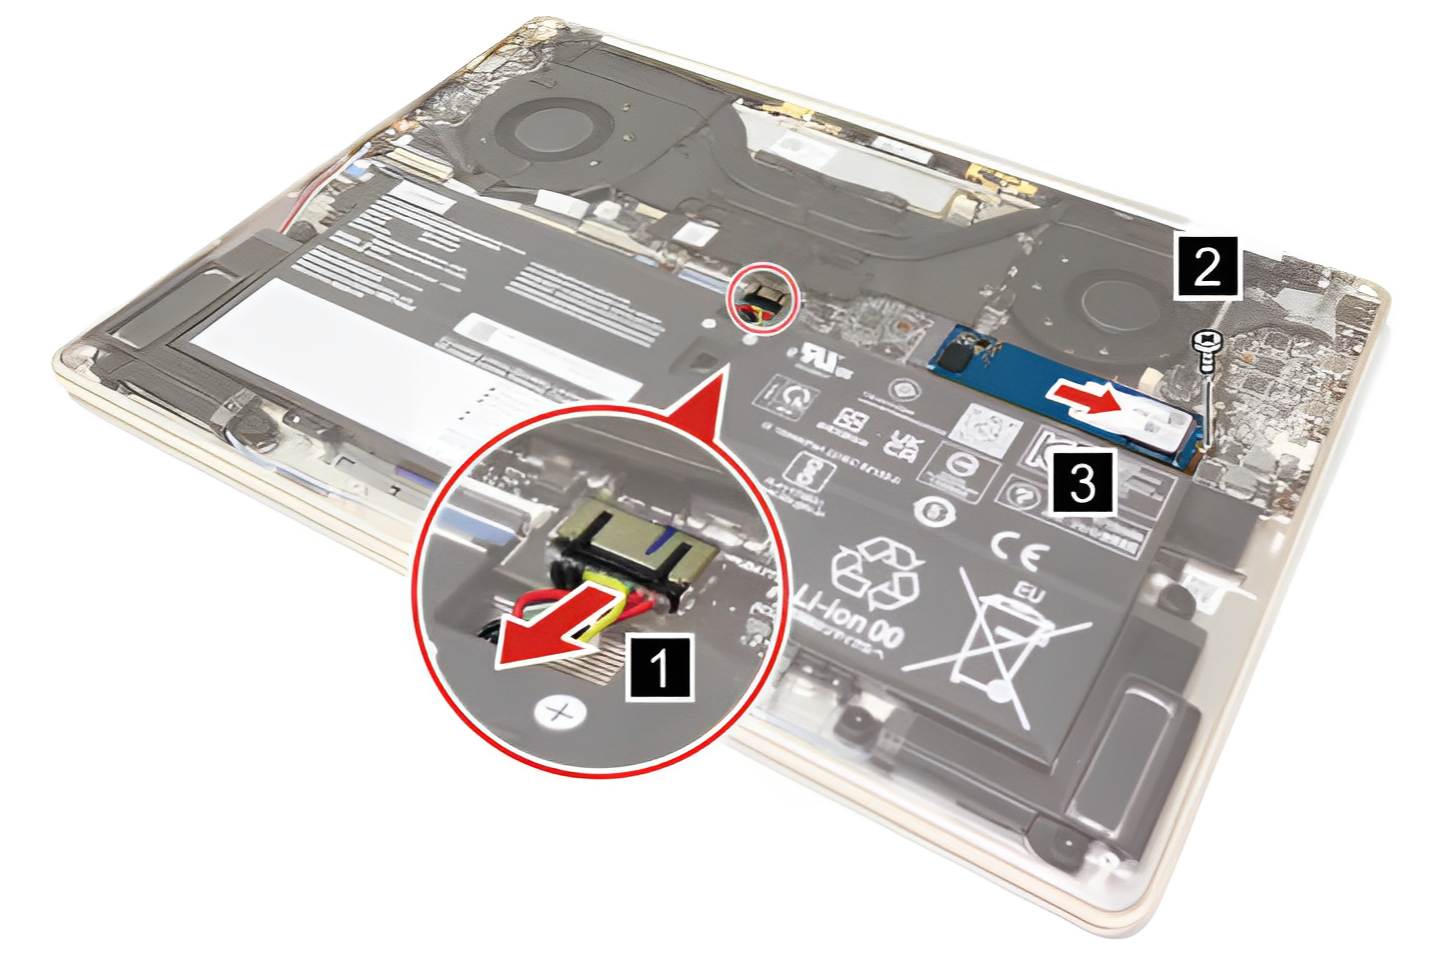 Illustration showing how to disconnect the battery cable and remove the M.2 2280 SSD on Lenovo Yoga 9i